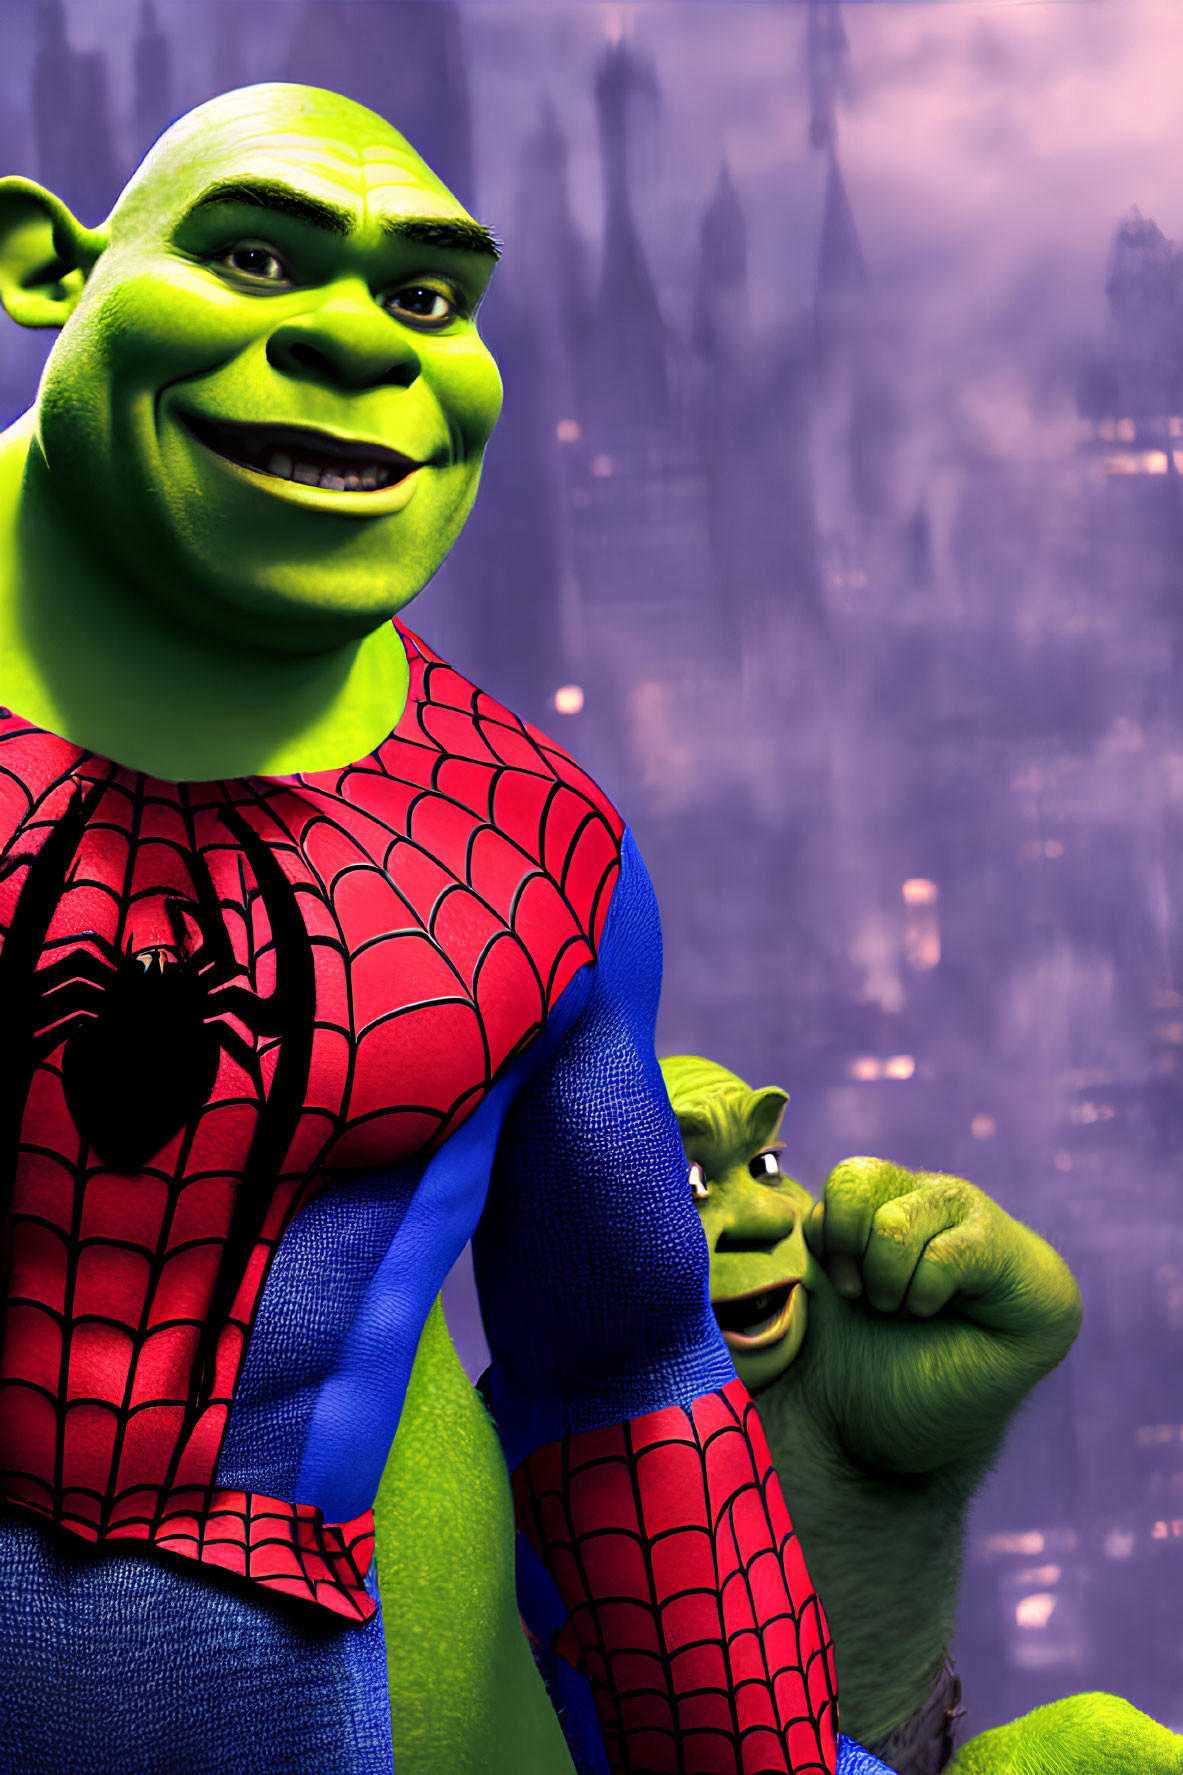 Shrek character in Spider-Man costume with smiling expression, next to smaller Shrek, spooky castle background